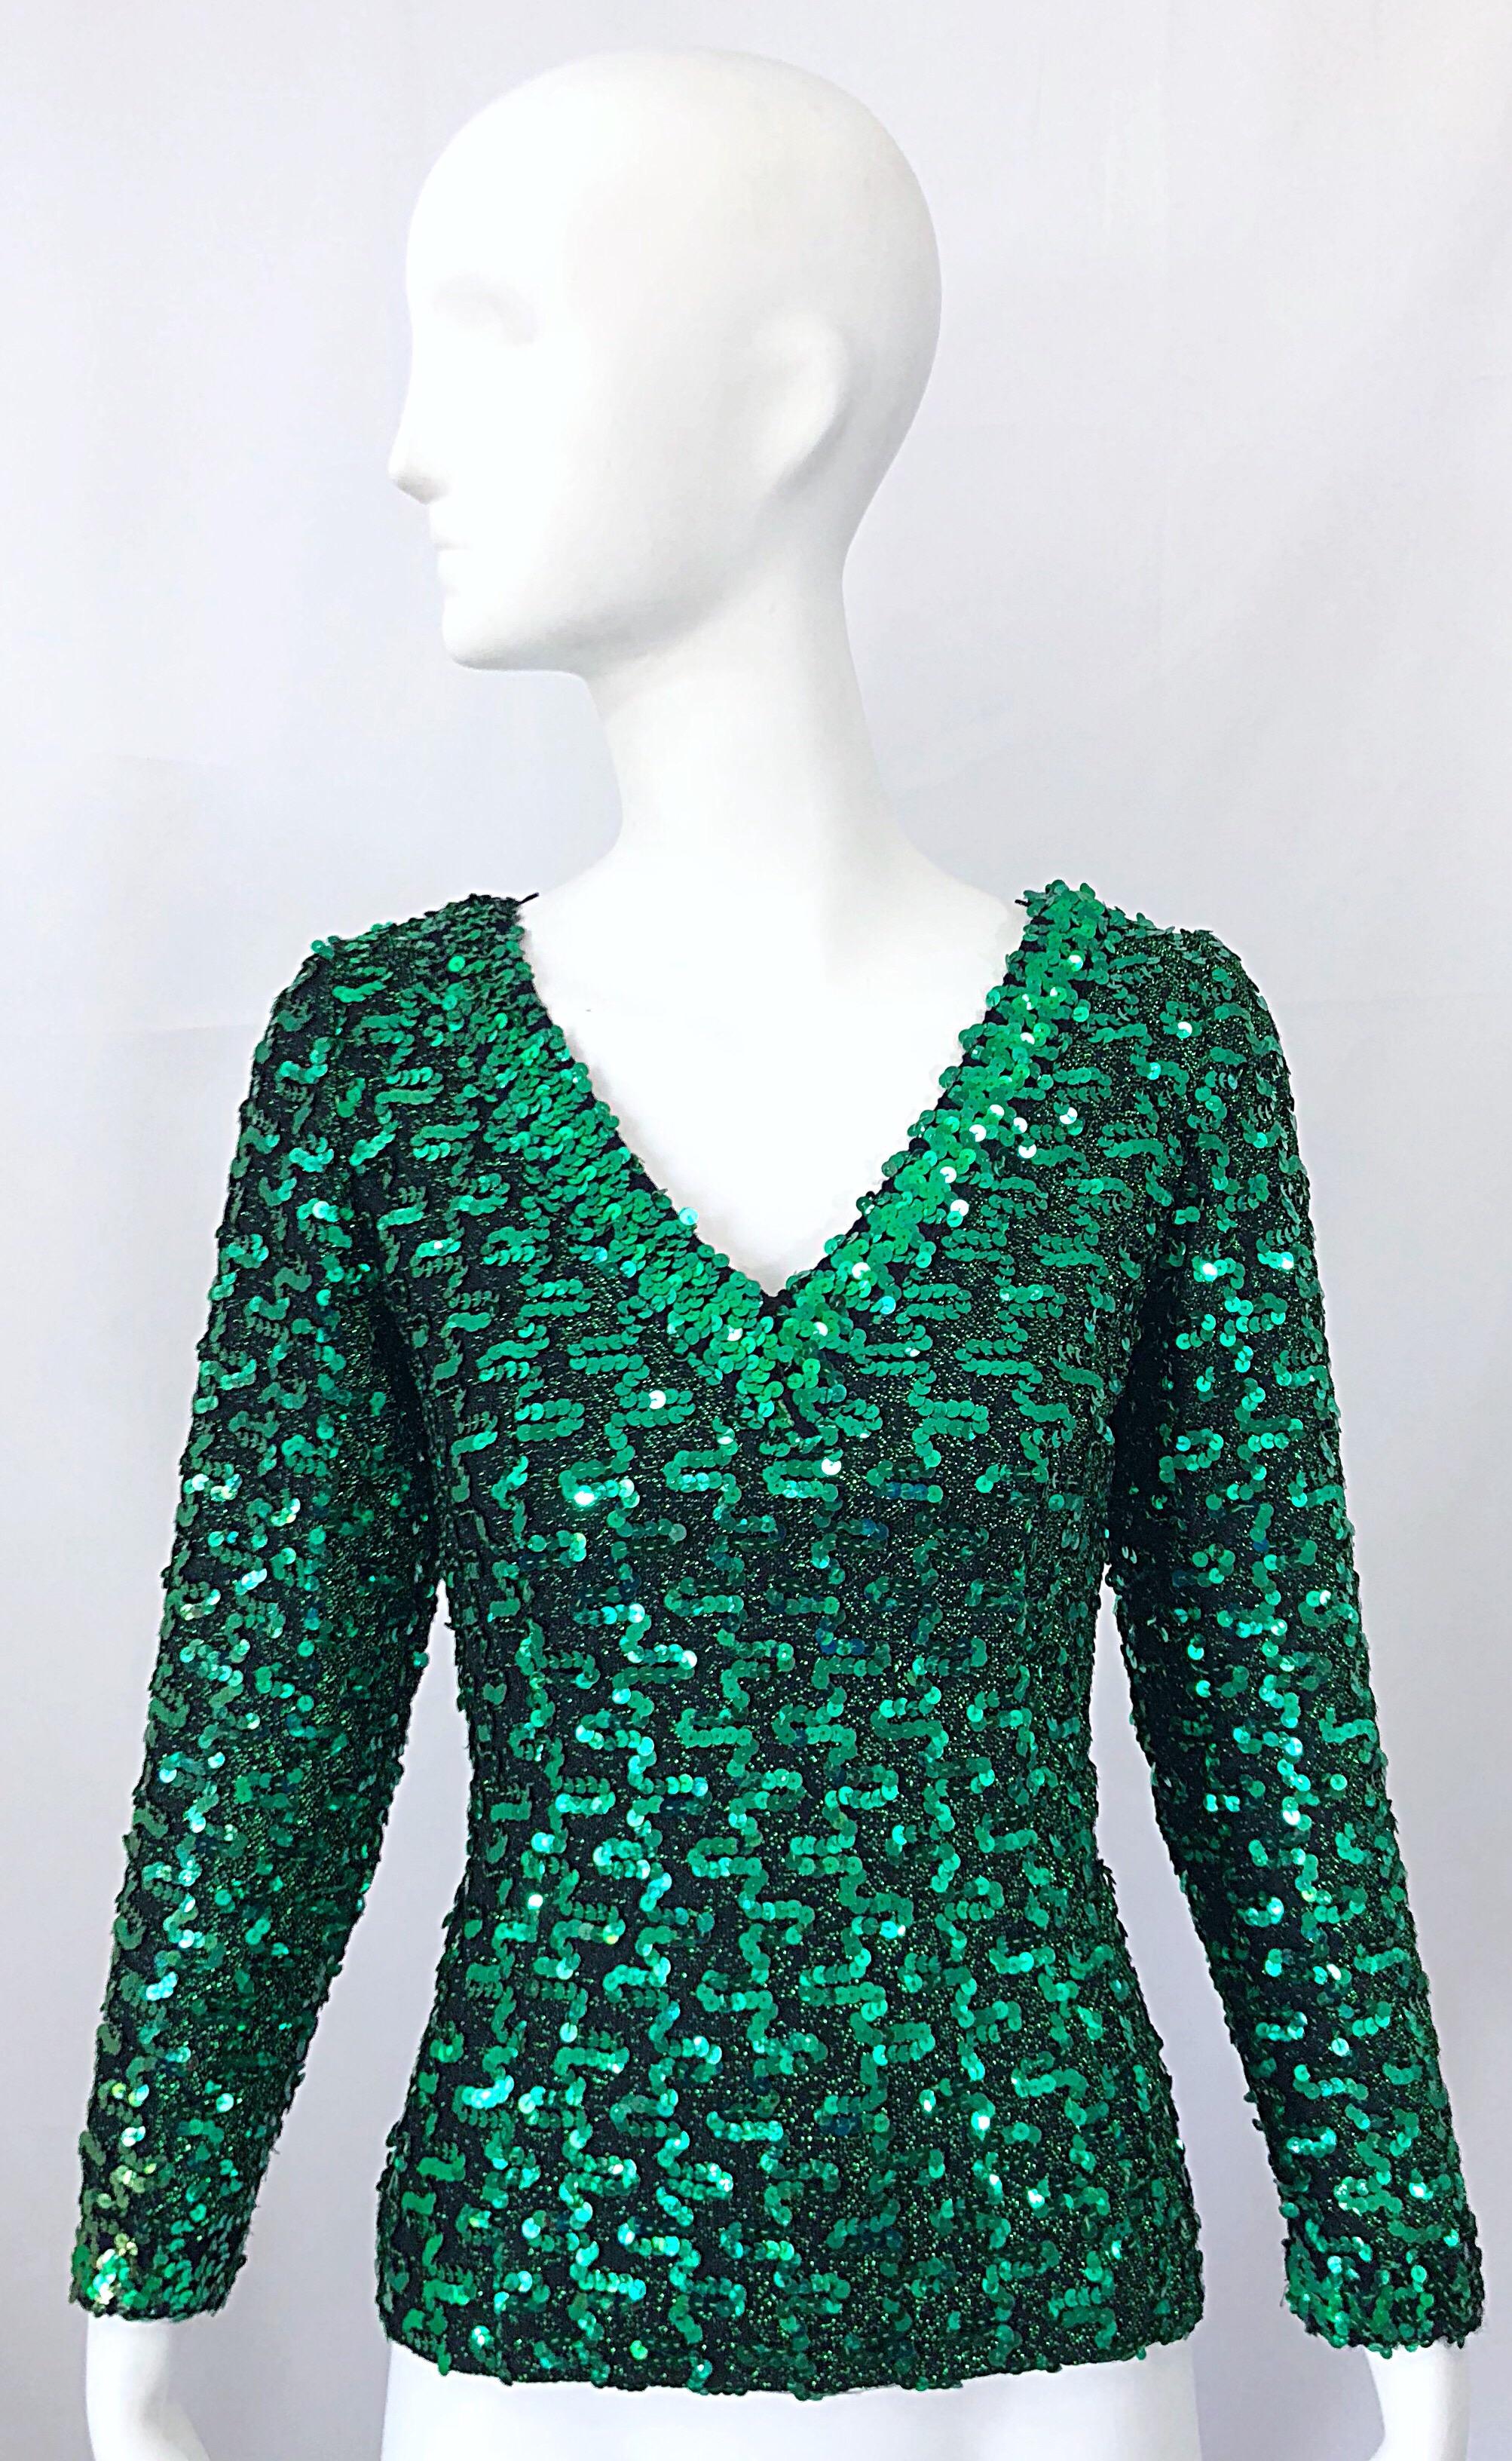 Beautiful, and just in time for the holidays! Vintage 70s LILLI DIAMOND kelly green metallic knit jersey sequined top! Features green metallic jersey with thousands of hand-sewn sequins throughout. Fantastic fit that stretches to fit. Full metal